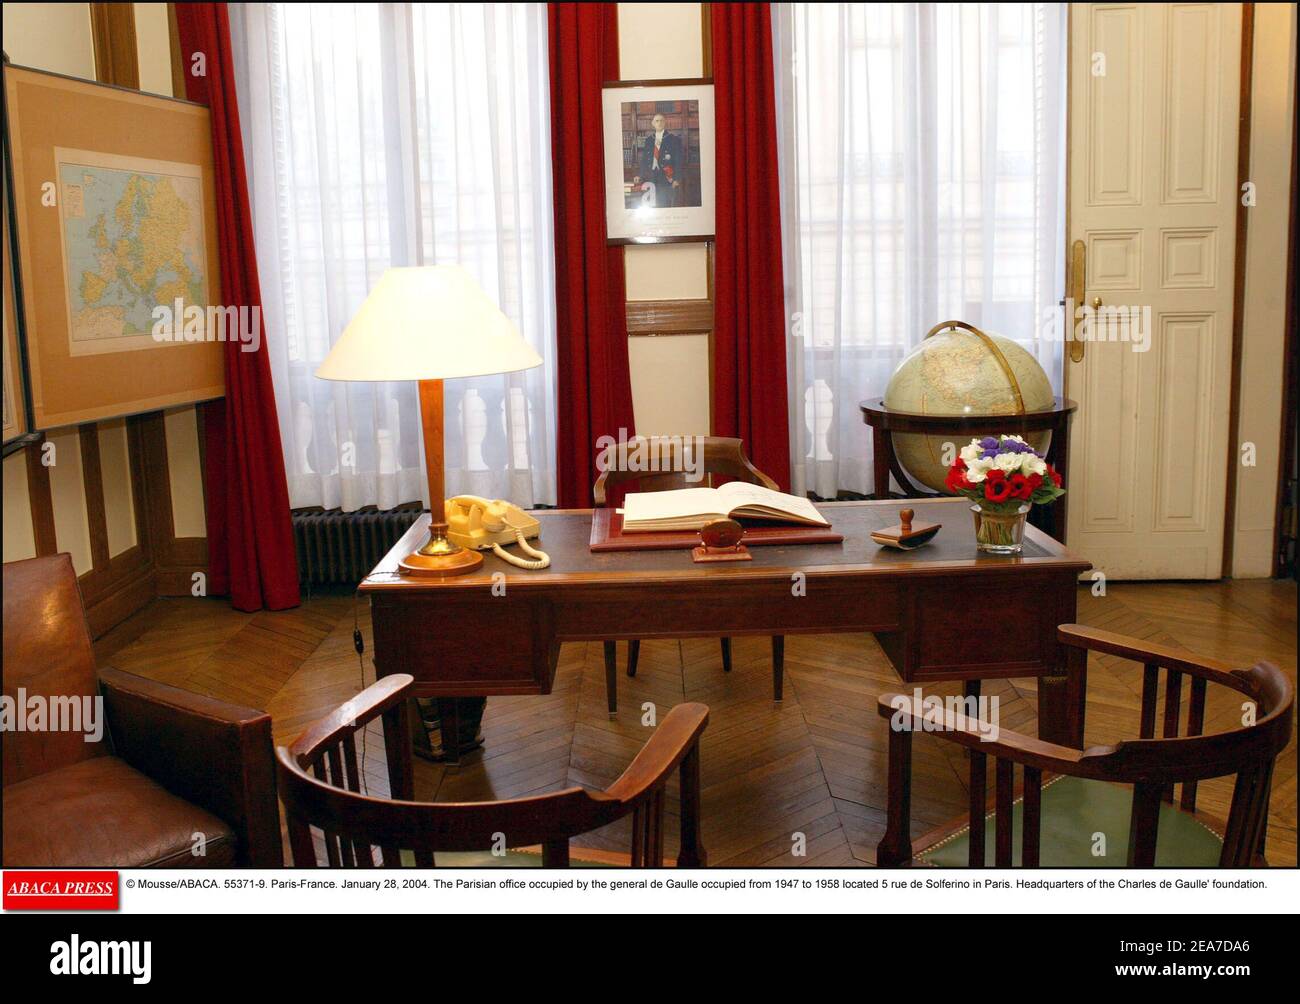 © Mousse/ABACA. 55371-9. Paris-France. January 28, 2004. The Parisian office occupied by the general de Gaulle occupied from 1947 to 1958 located 5 rue de Solferino in Paris. Headquarters of the Charles de Gaulle' foundation. Stock Photo